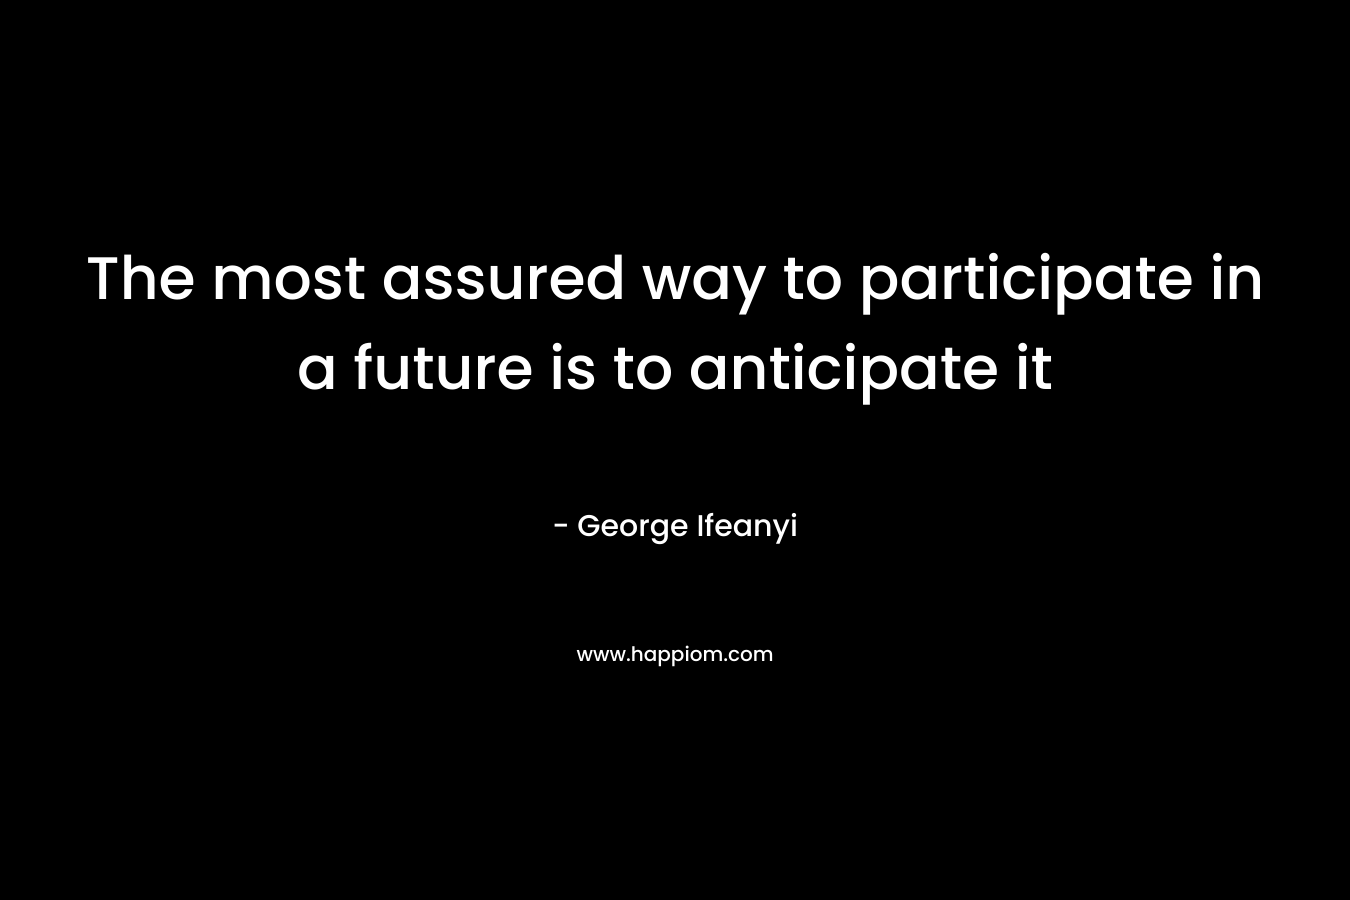 The most assured way to participate in a future is to anticipate it